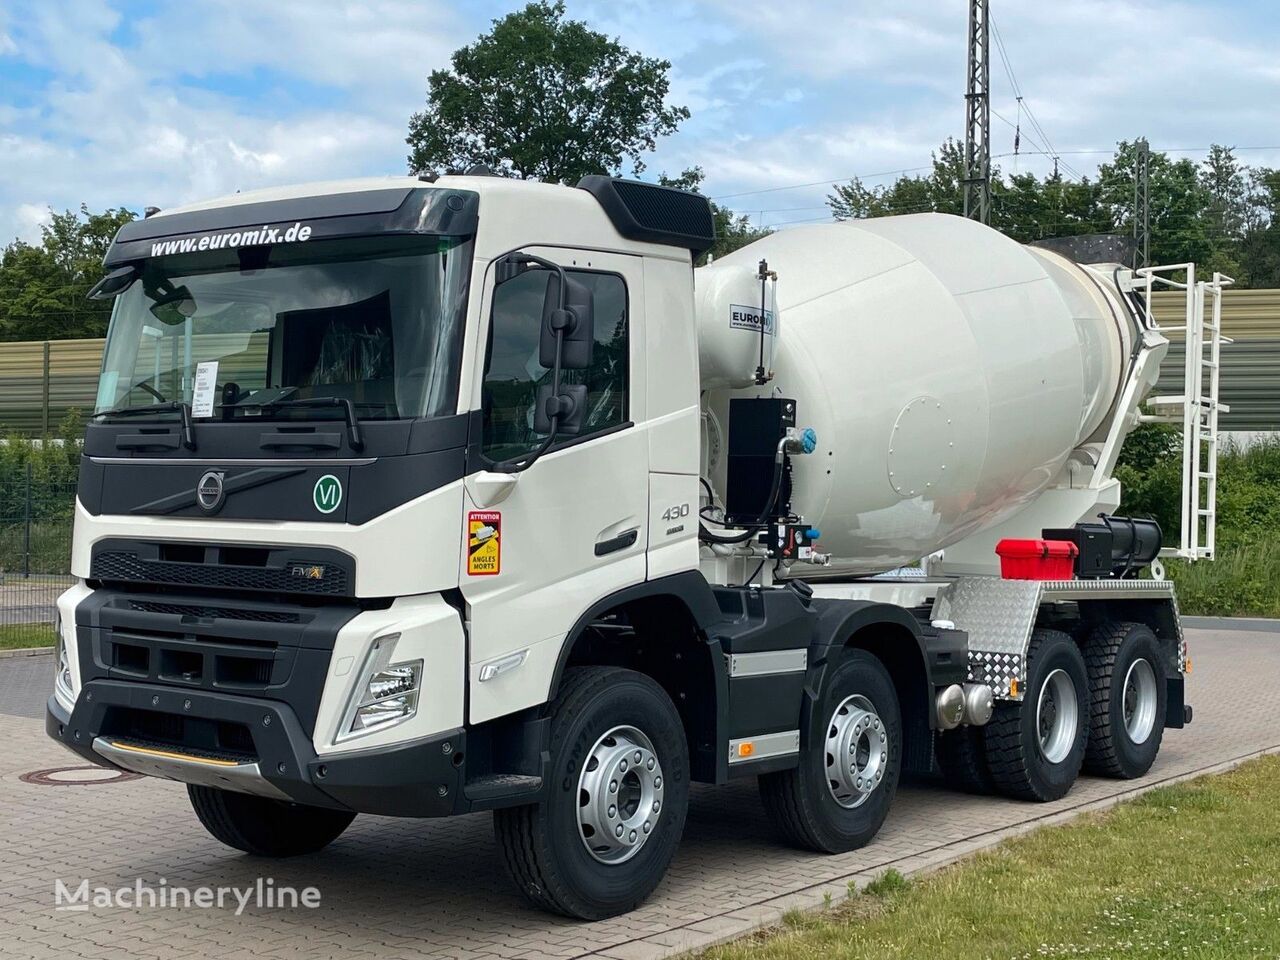 new Euromix MTP  on chassis Volvo FMX 430  concrete mixer truck